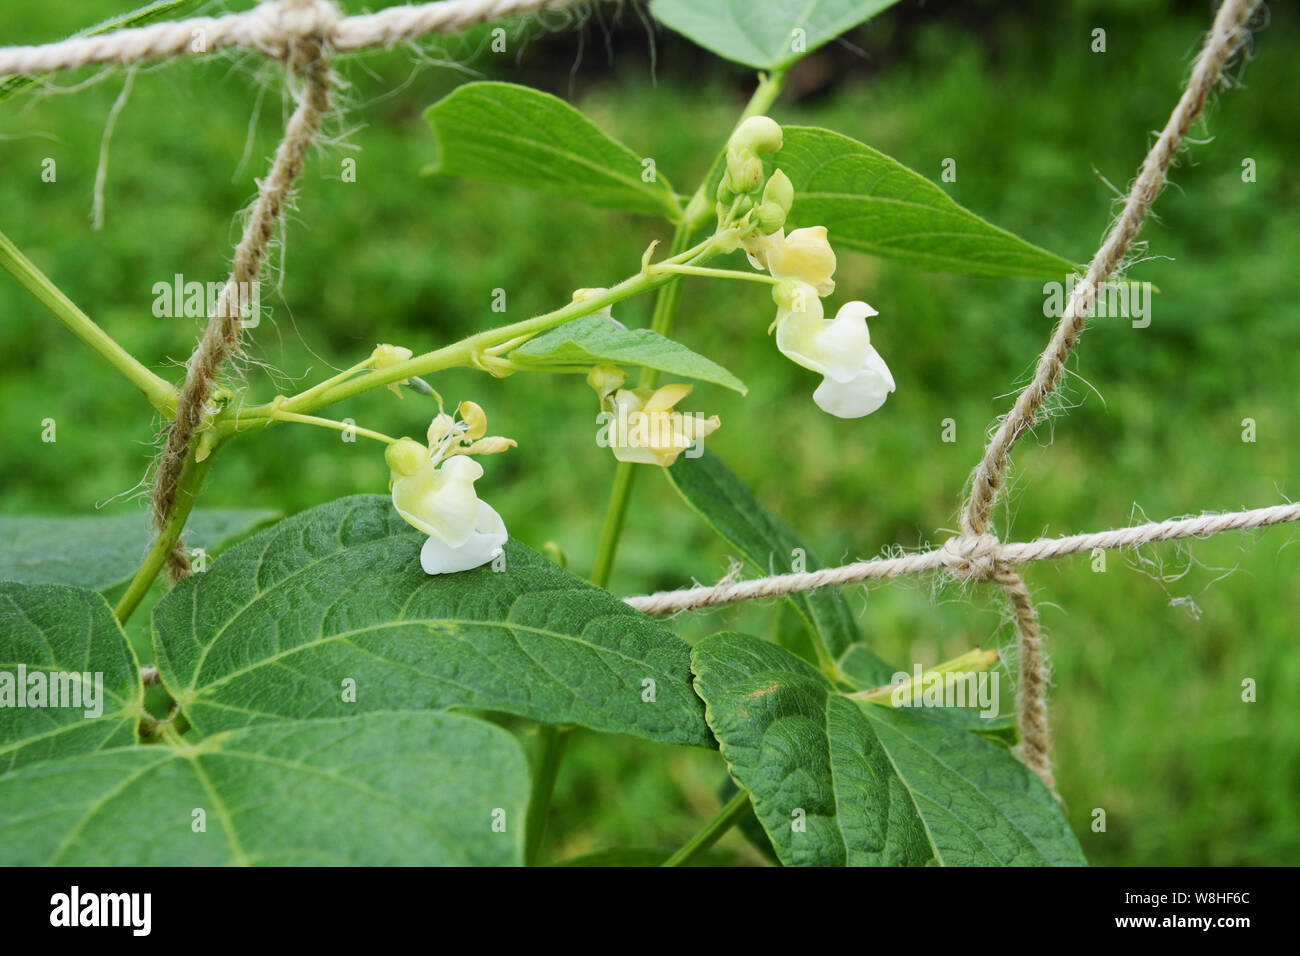 White flowers of a calypso bean plant - Phaseolus vulgaris - supported by twine netting Stock Photo